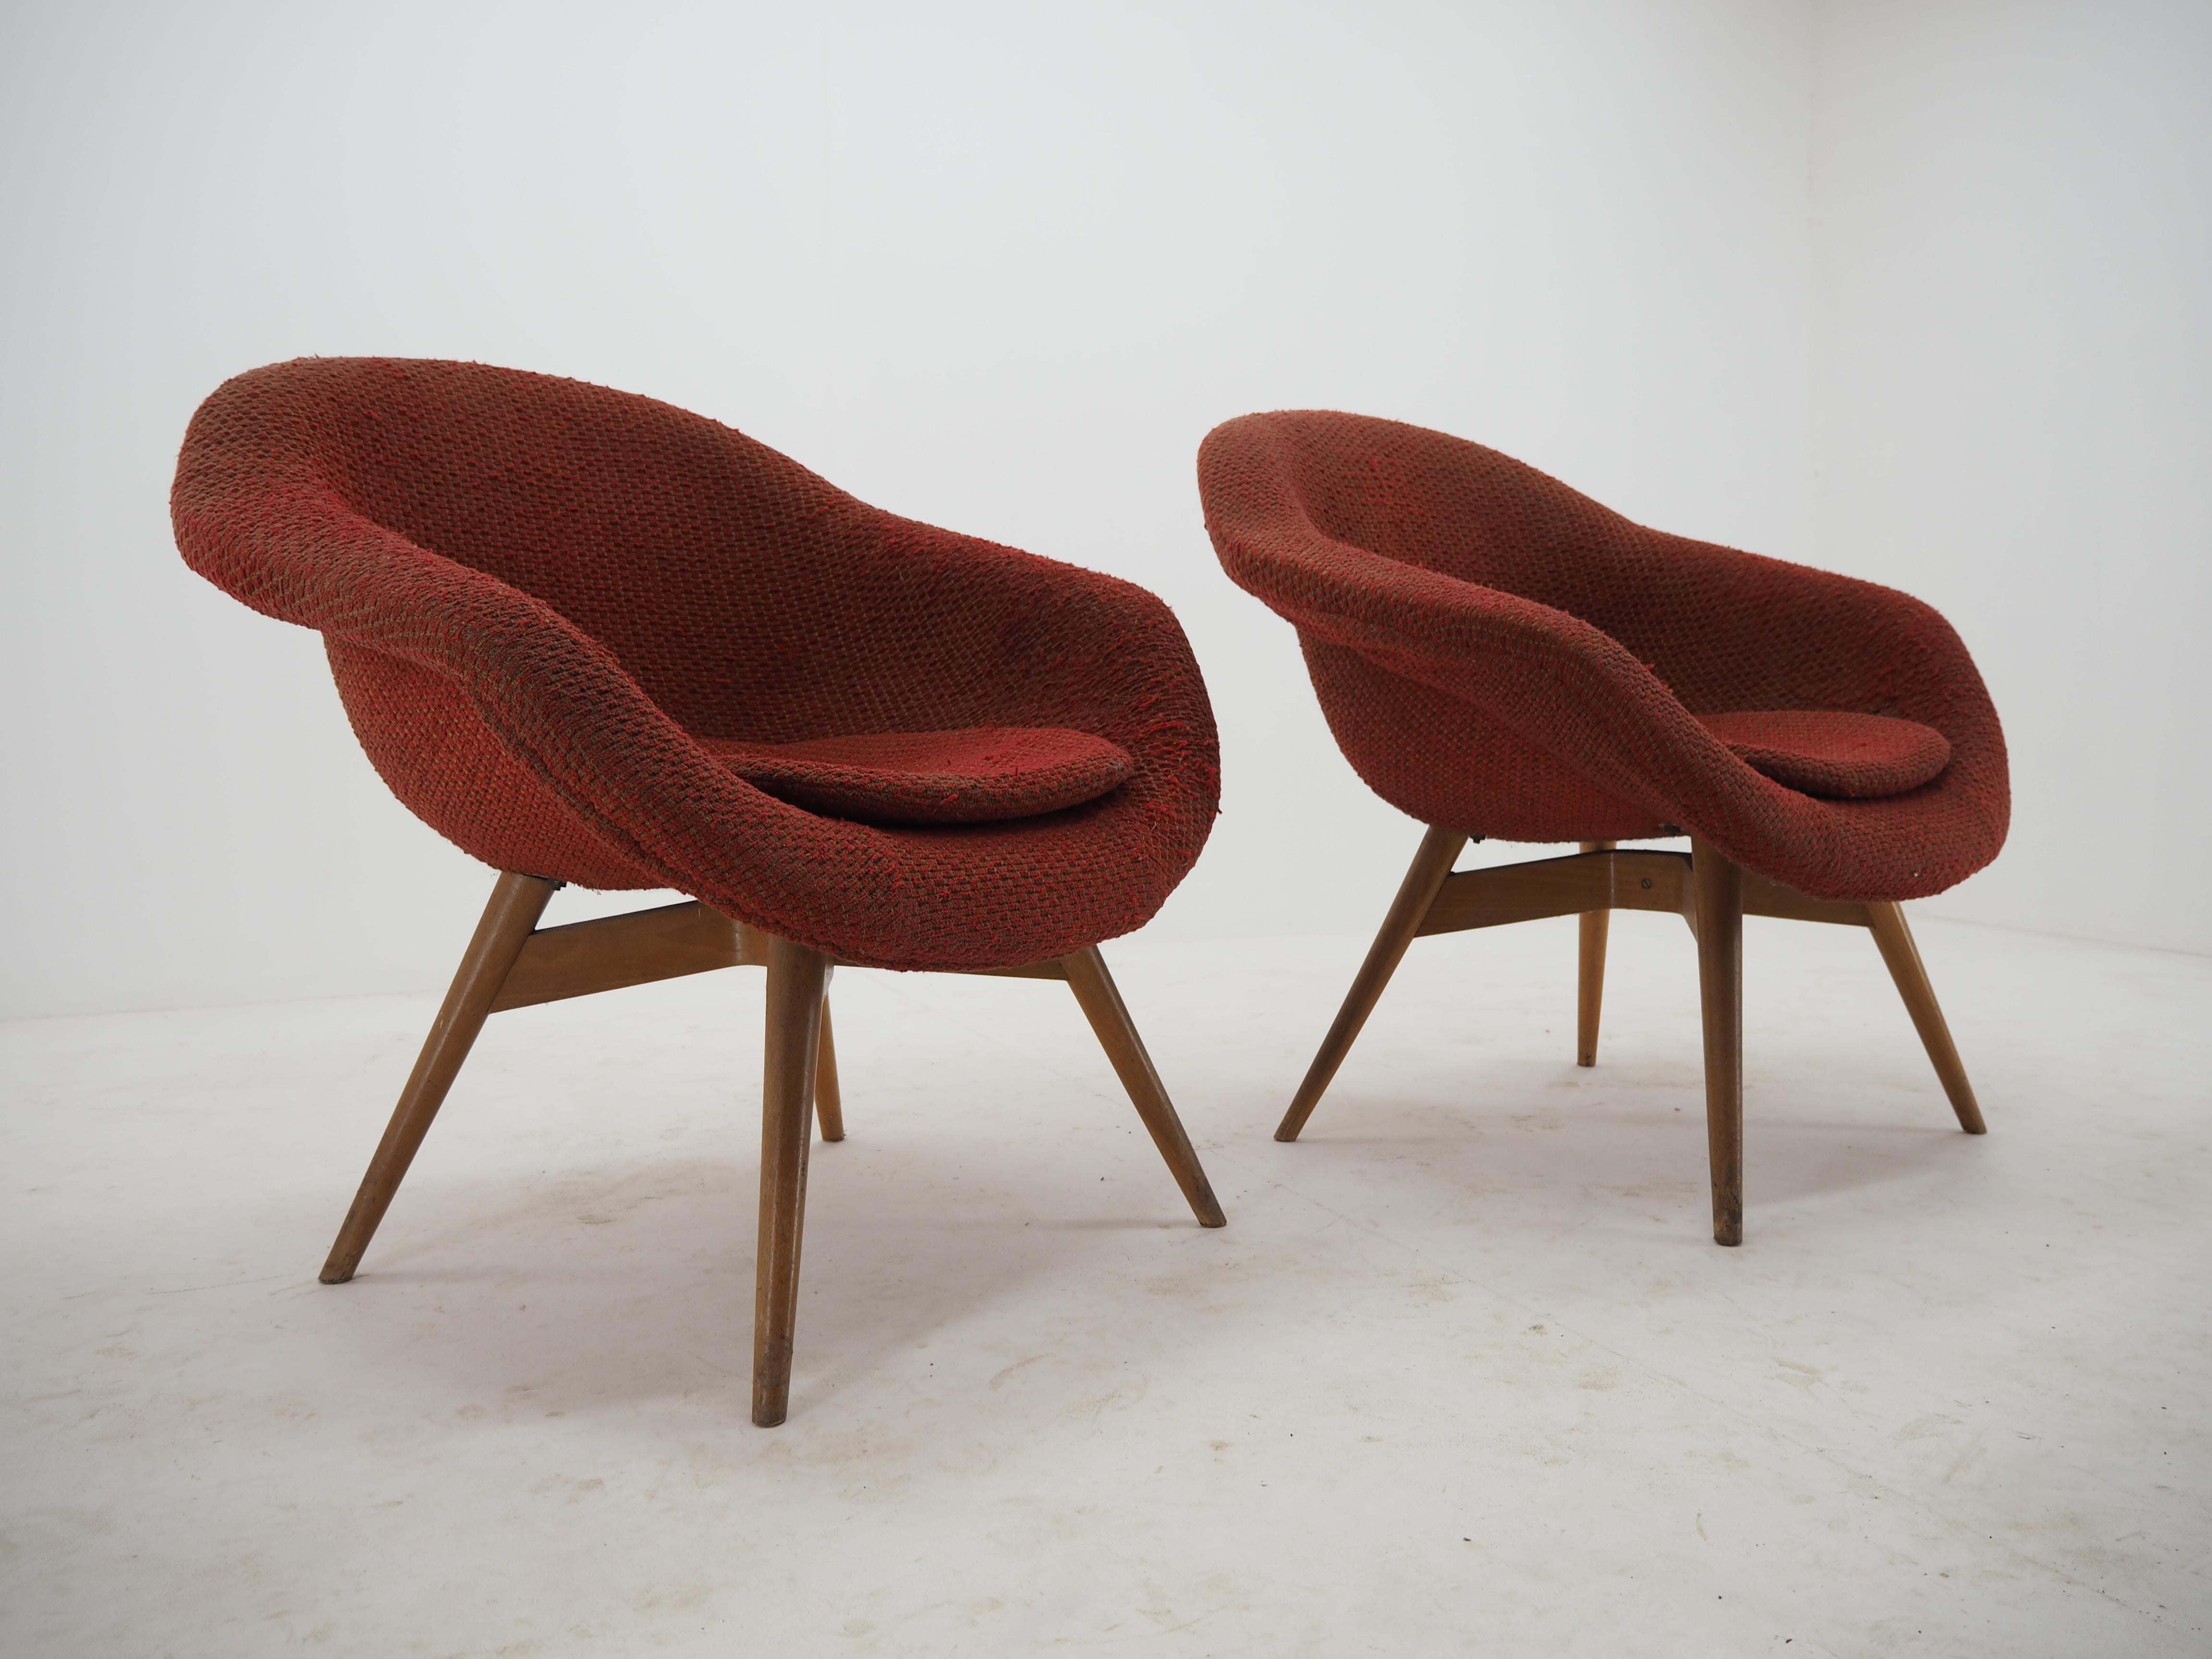 Wood Pair of Lounge Chairs by Miroslav Navratil, 1960s